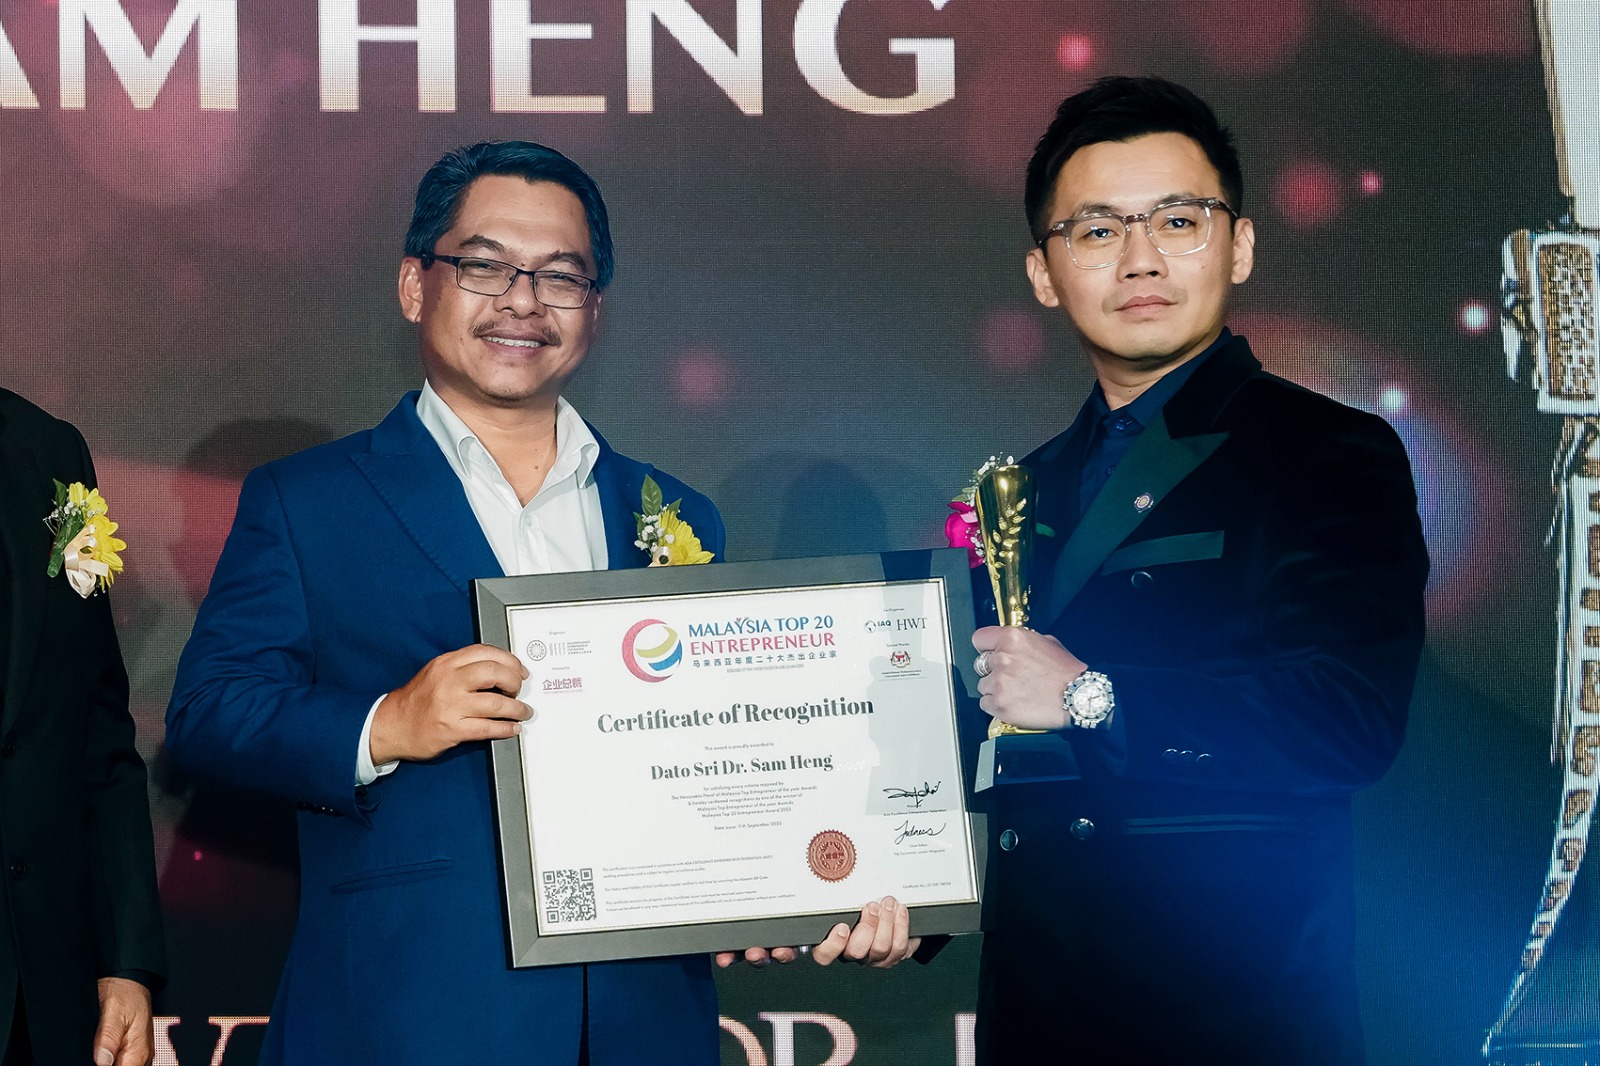 [BUSINESS] Congratulations to Dato Sri Dr. Sam Heng for being awarded the Malaysia Top 20 Entrepreneur of the Year Awards 2023